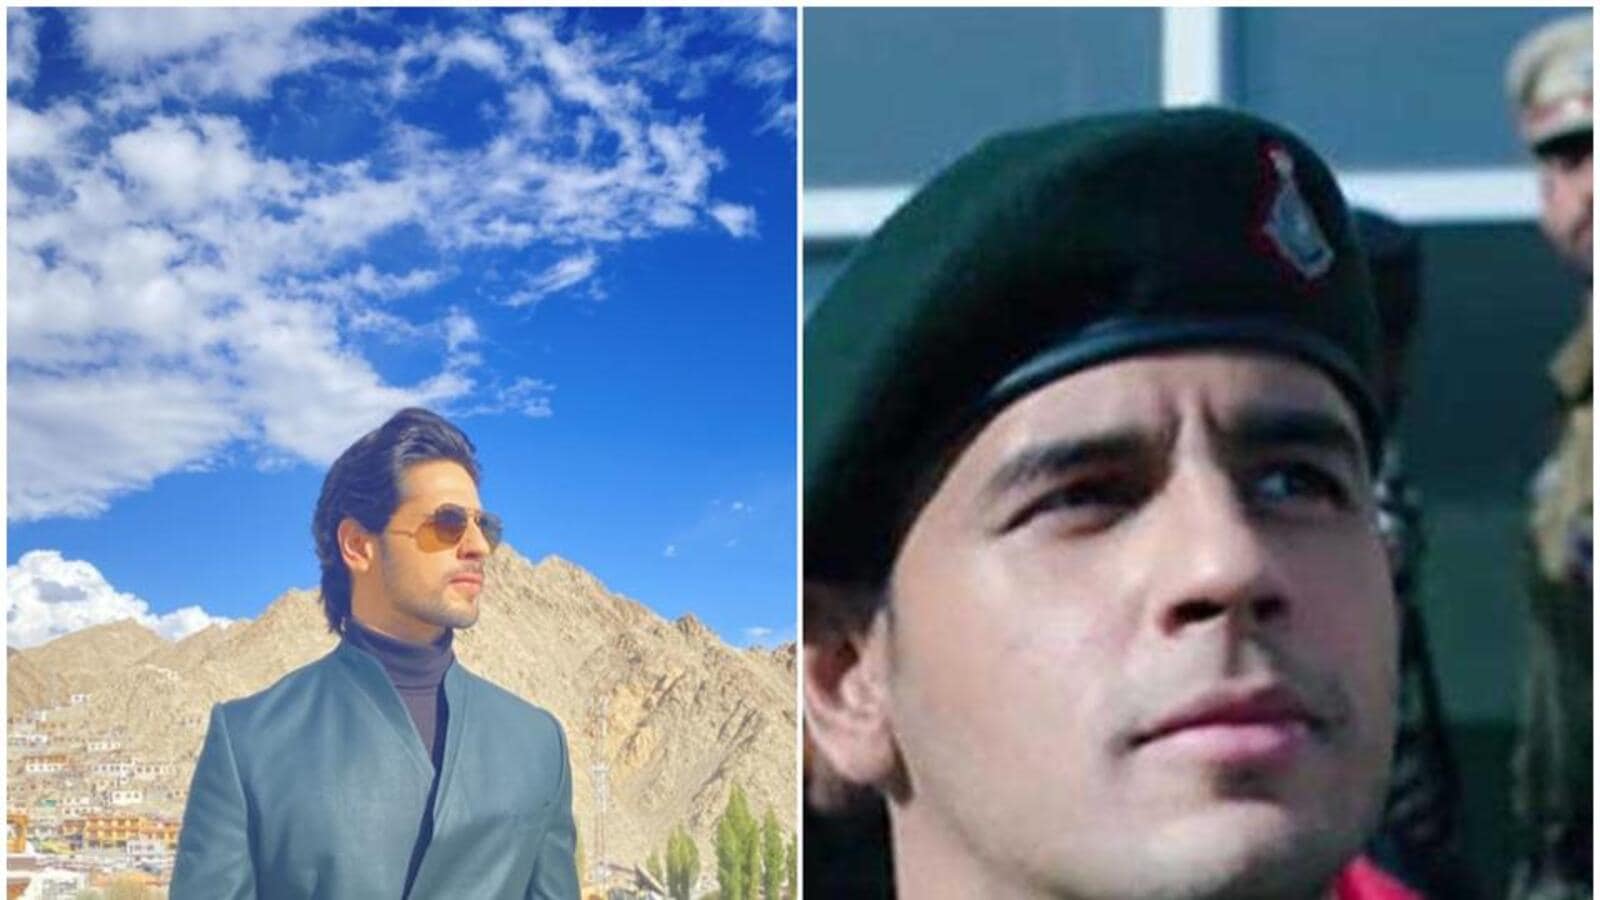 Sidharth Malhotra on Kargil Vijay Diwas: It’s a sacrifice that we must always remember and respect